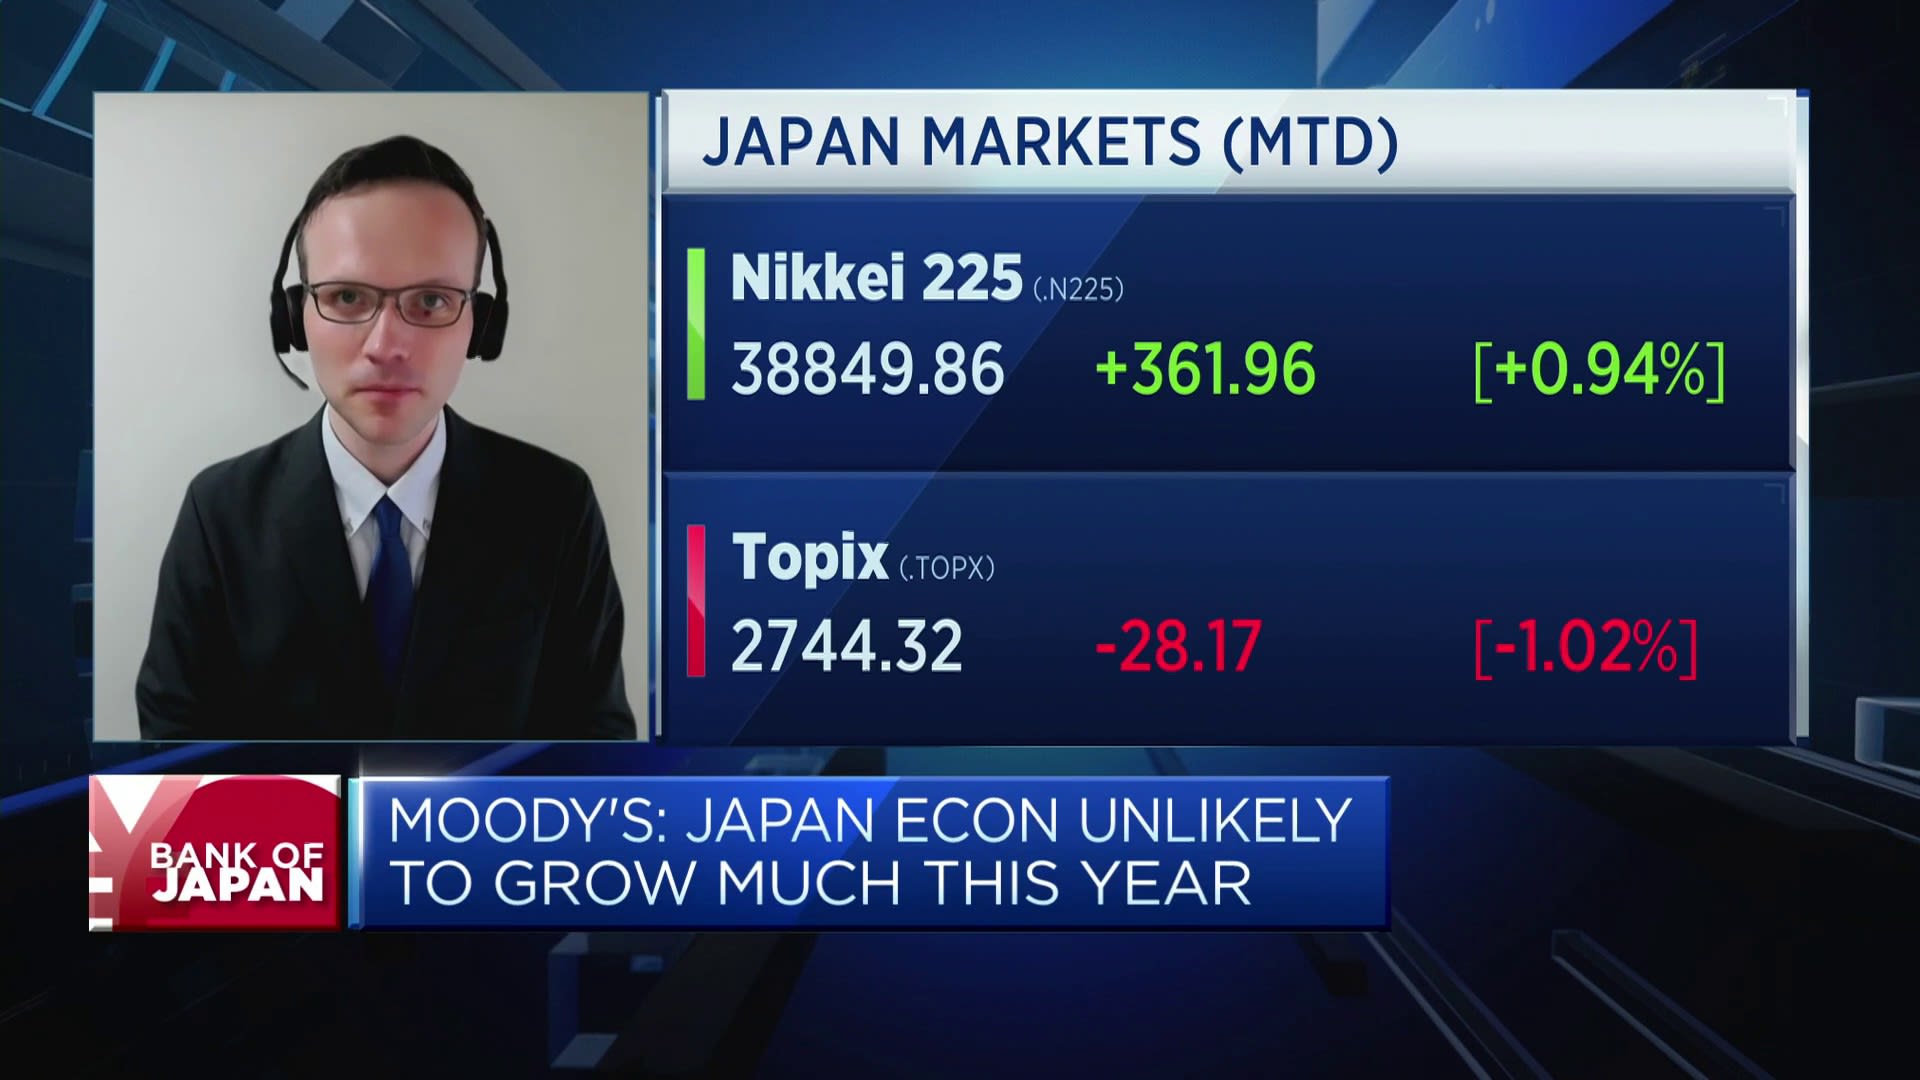 Japan second-quarter GDP data will probably look better: Economist [Video]